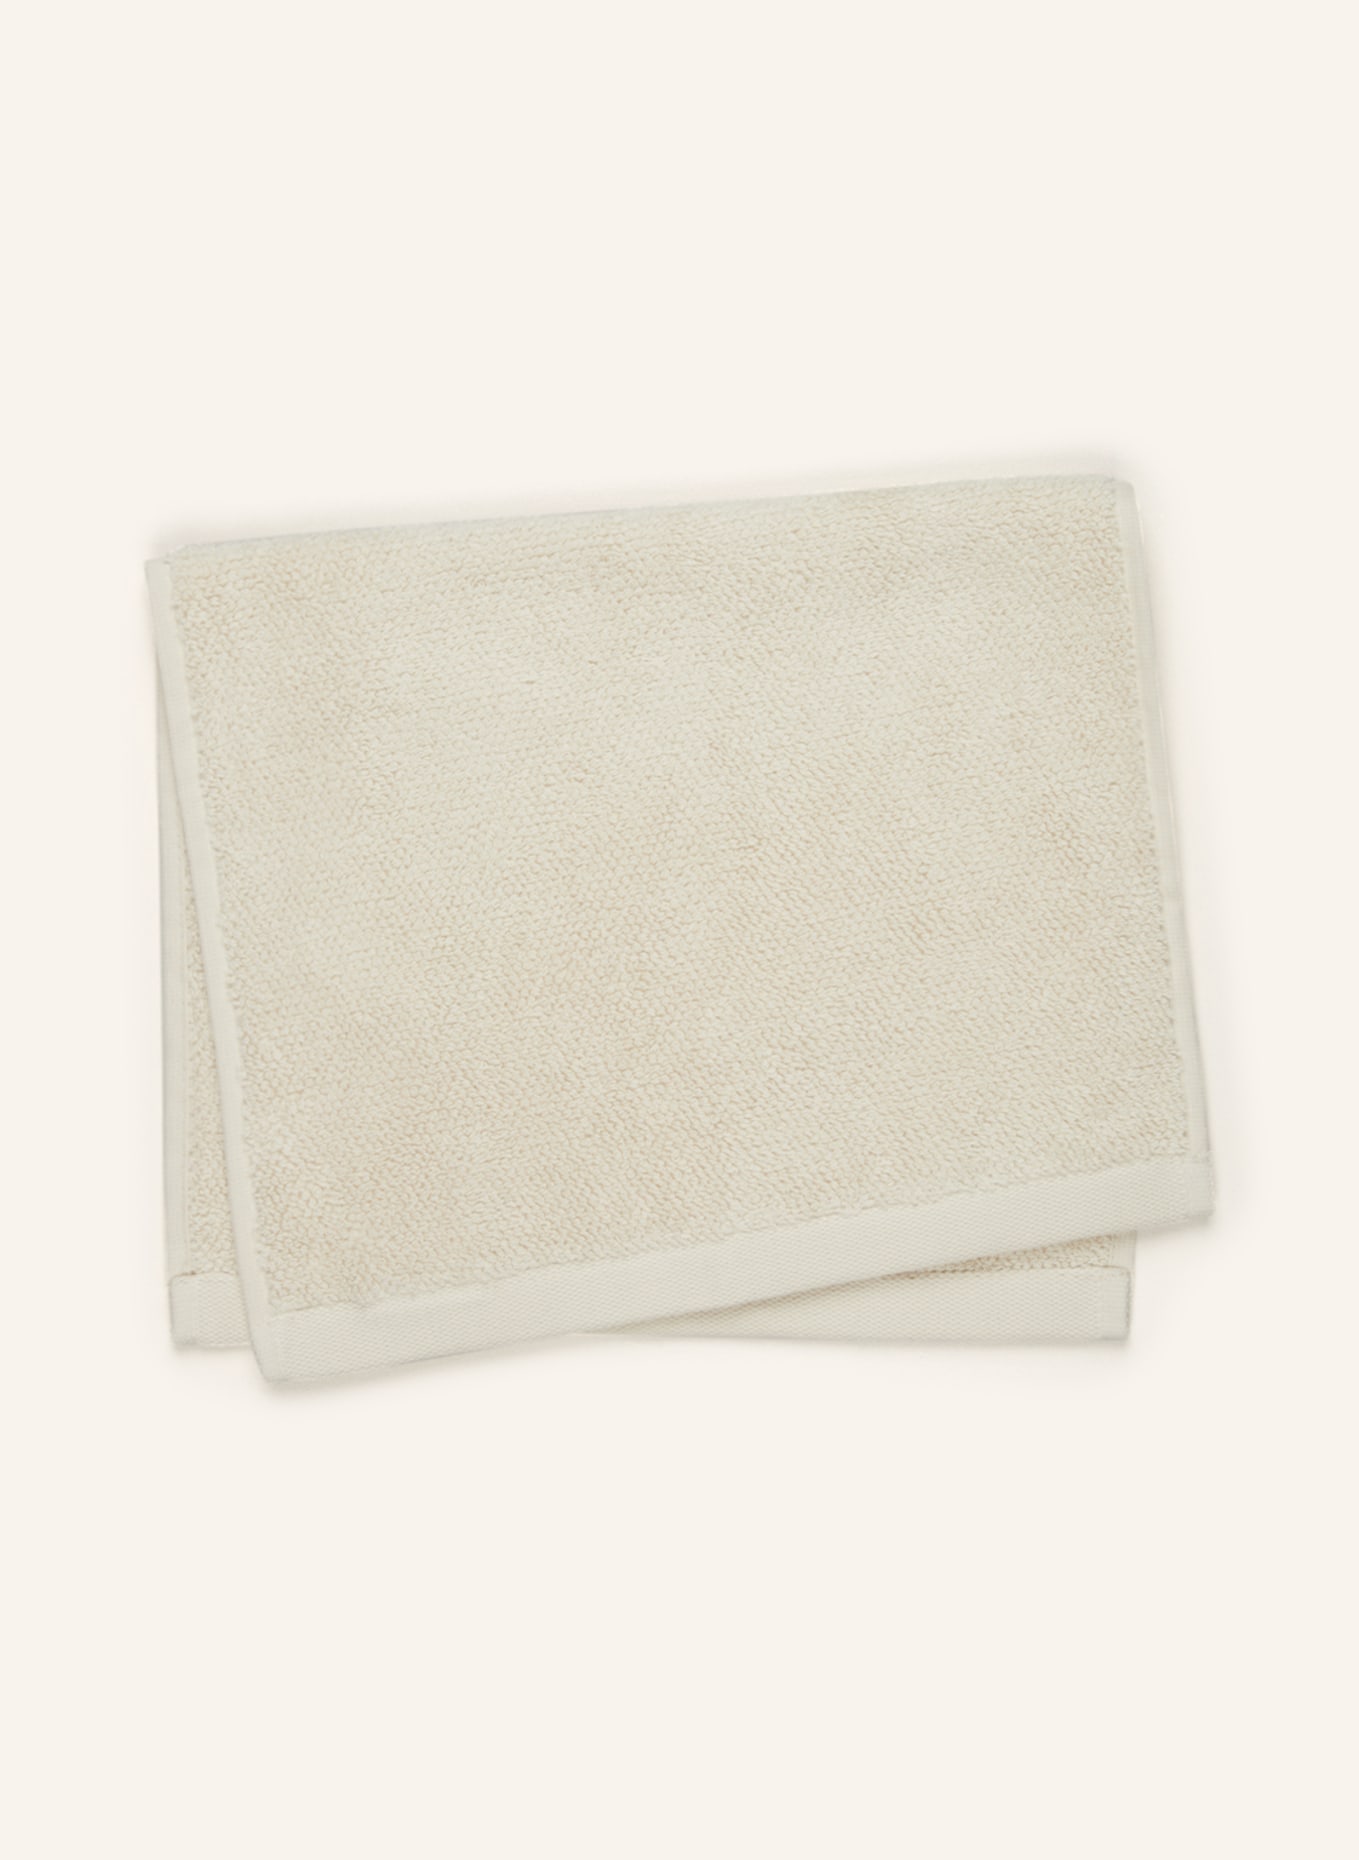 Marc O'Polo Guest towel TIMELESS, Color: CREAM (Image 2)